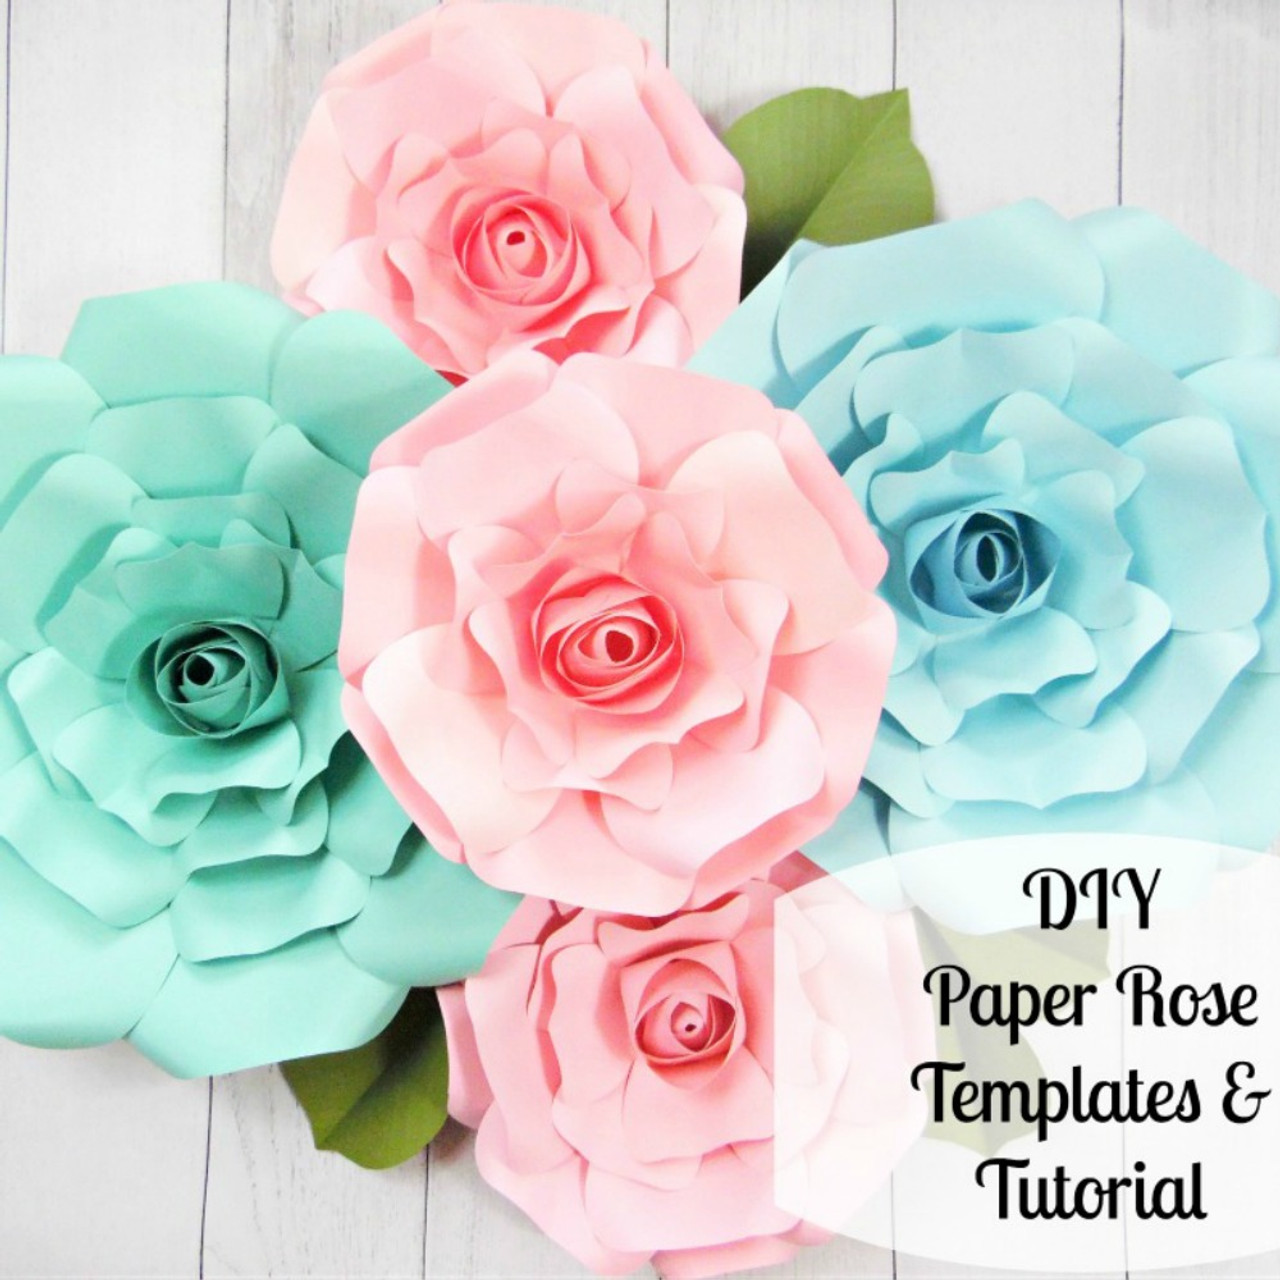 Download Giant Paper Rose Templates- Regina Style - Catching Colorflies